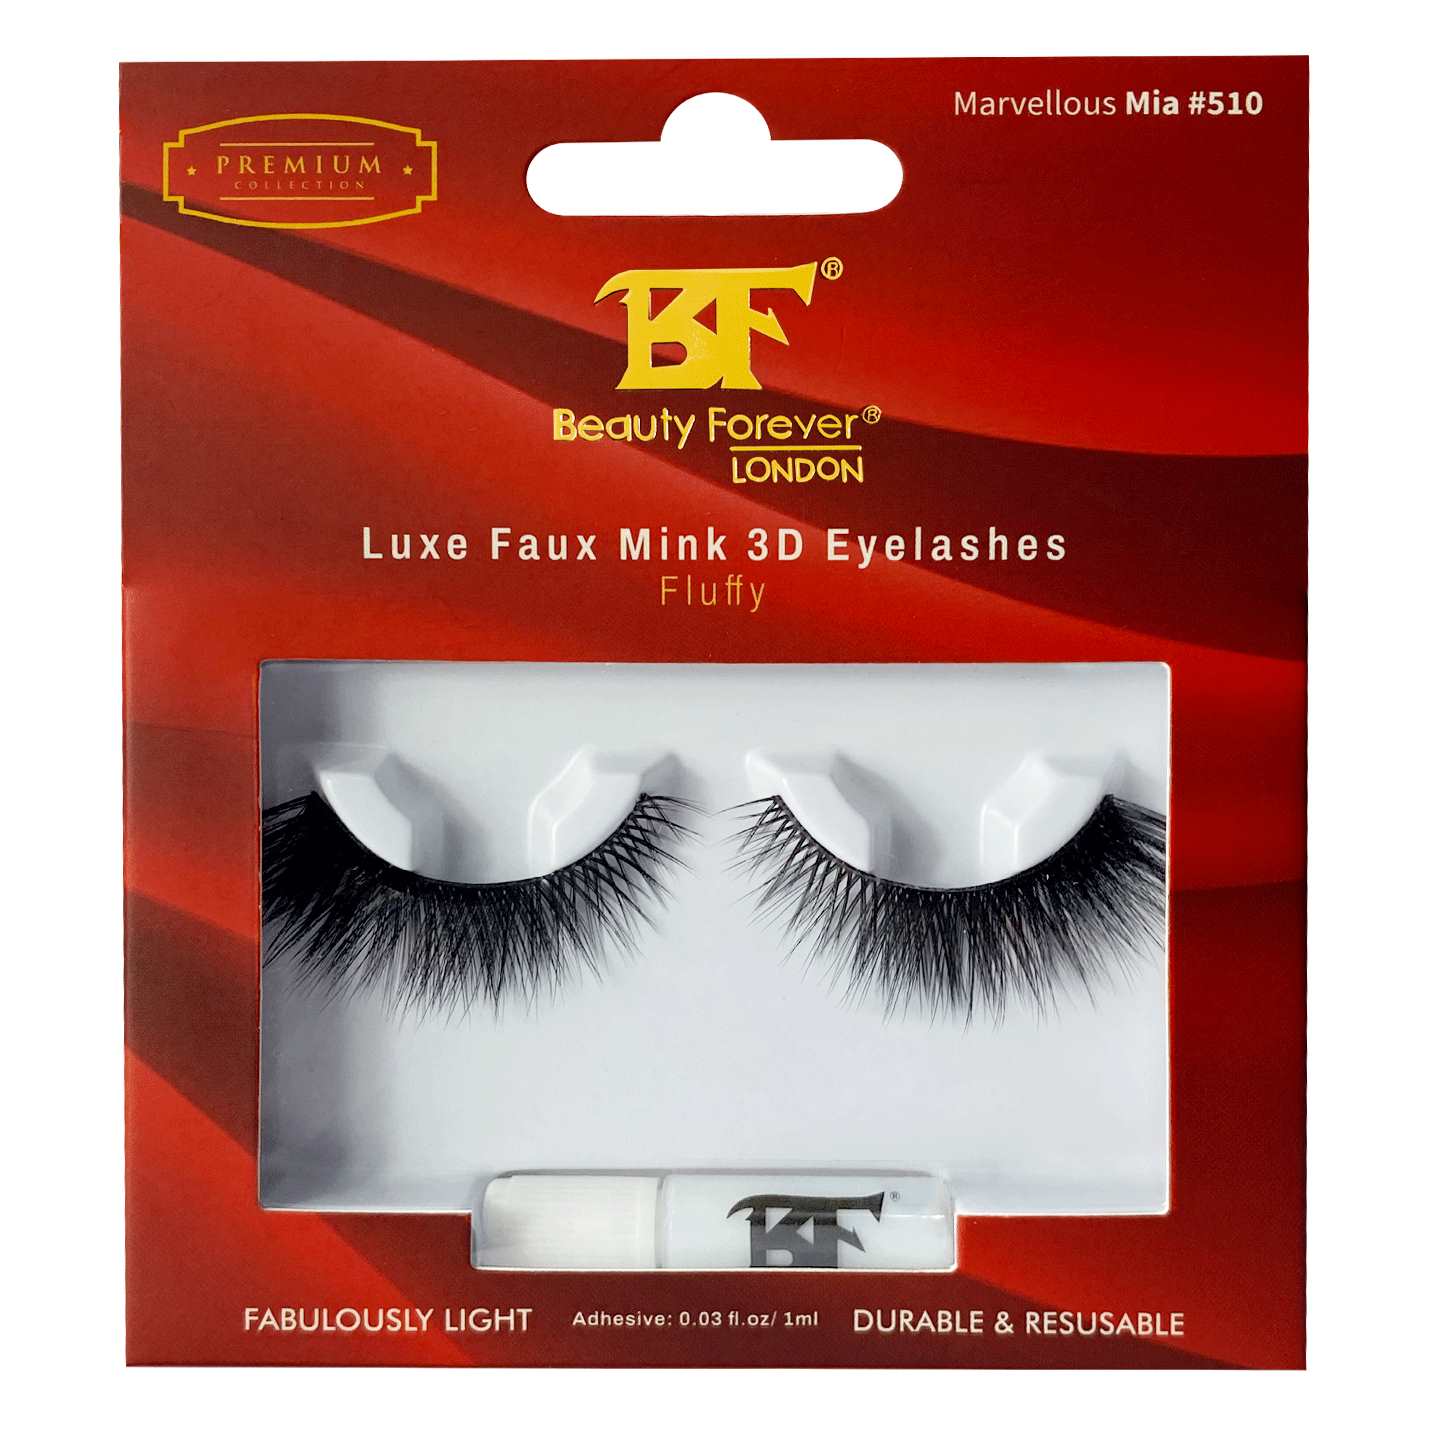 Beauty Forever Luxe Faux Mink 3D Eyelashes in Marvellous Mia #510